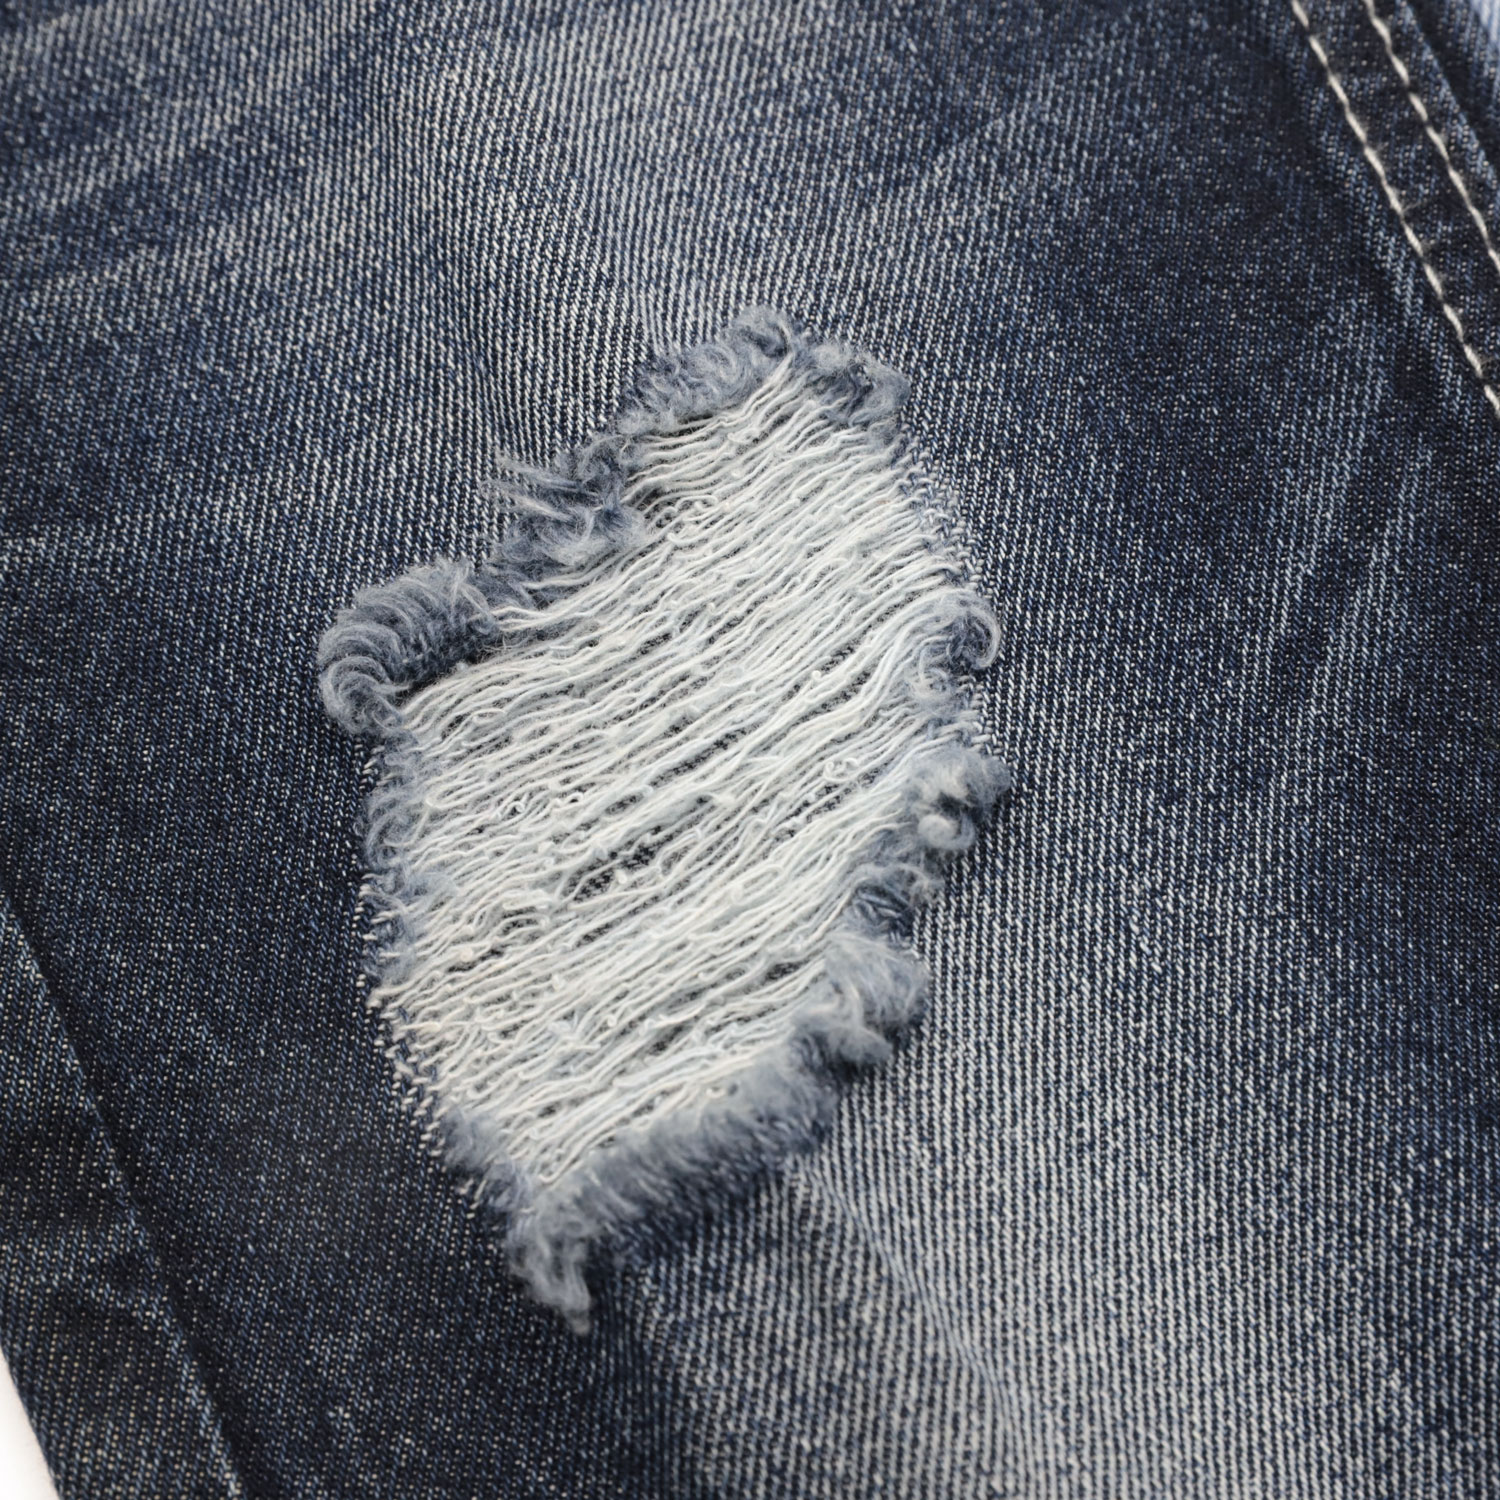 Can Jeans Be Machine Washed? What Should I Pay Attention to When Washing Jeans 1